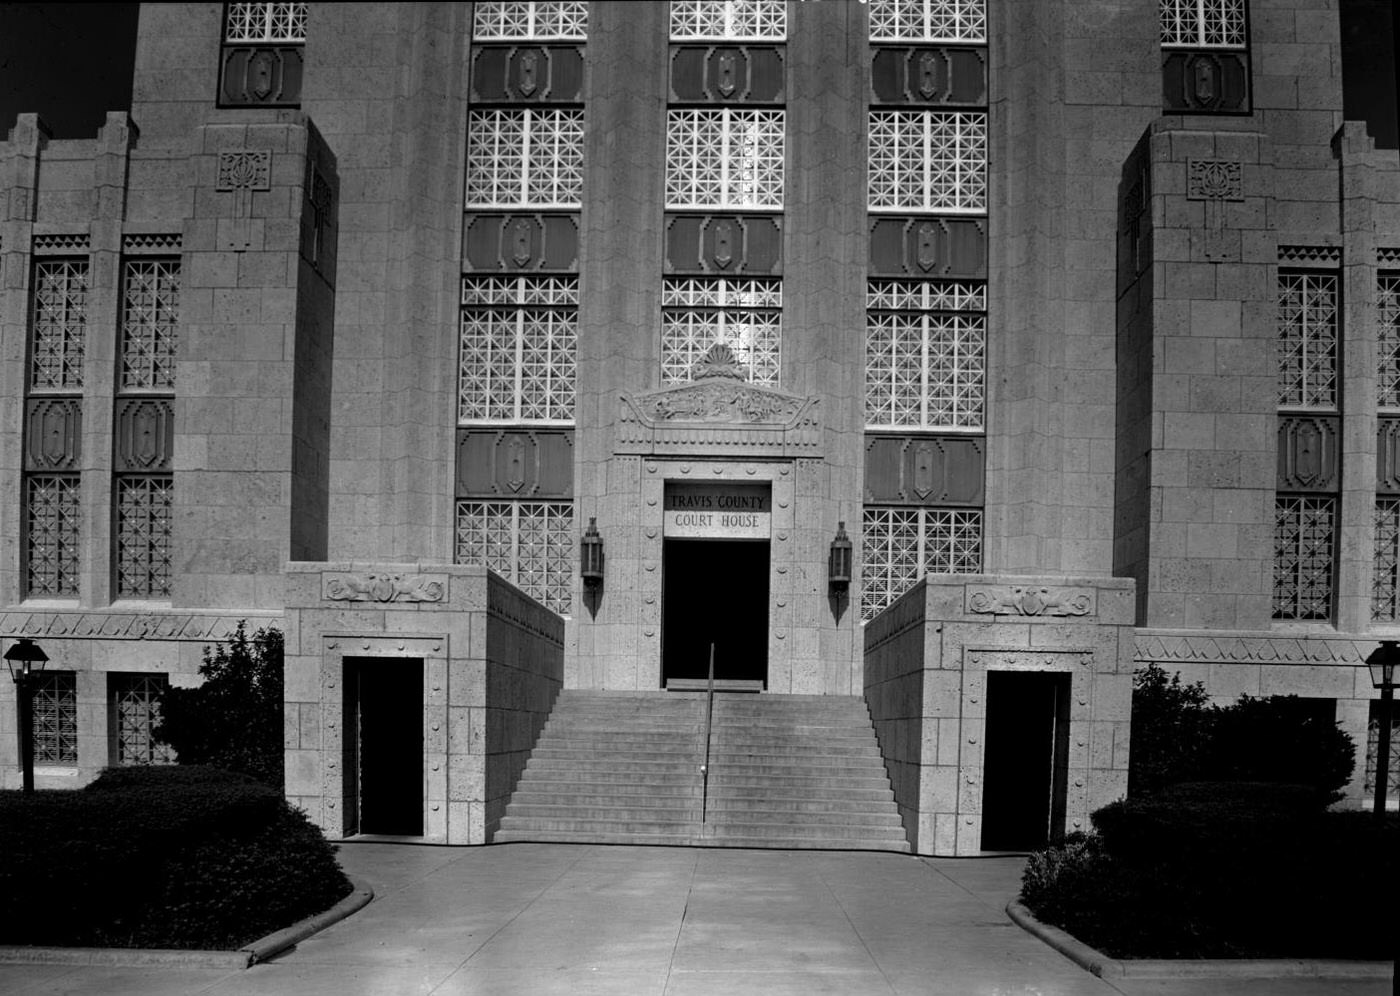 Travis County Courthouse Entrance with Gas Lights, 1959.